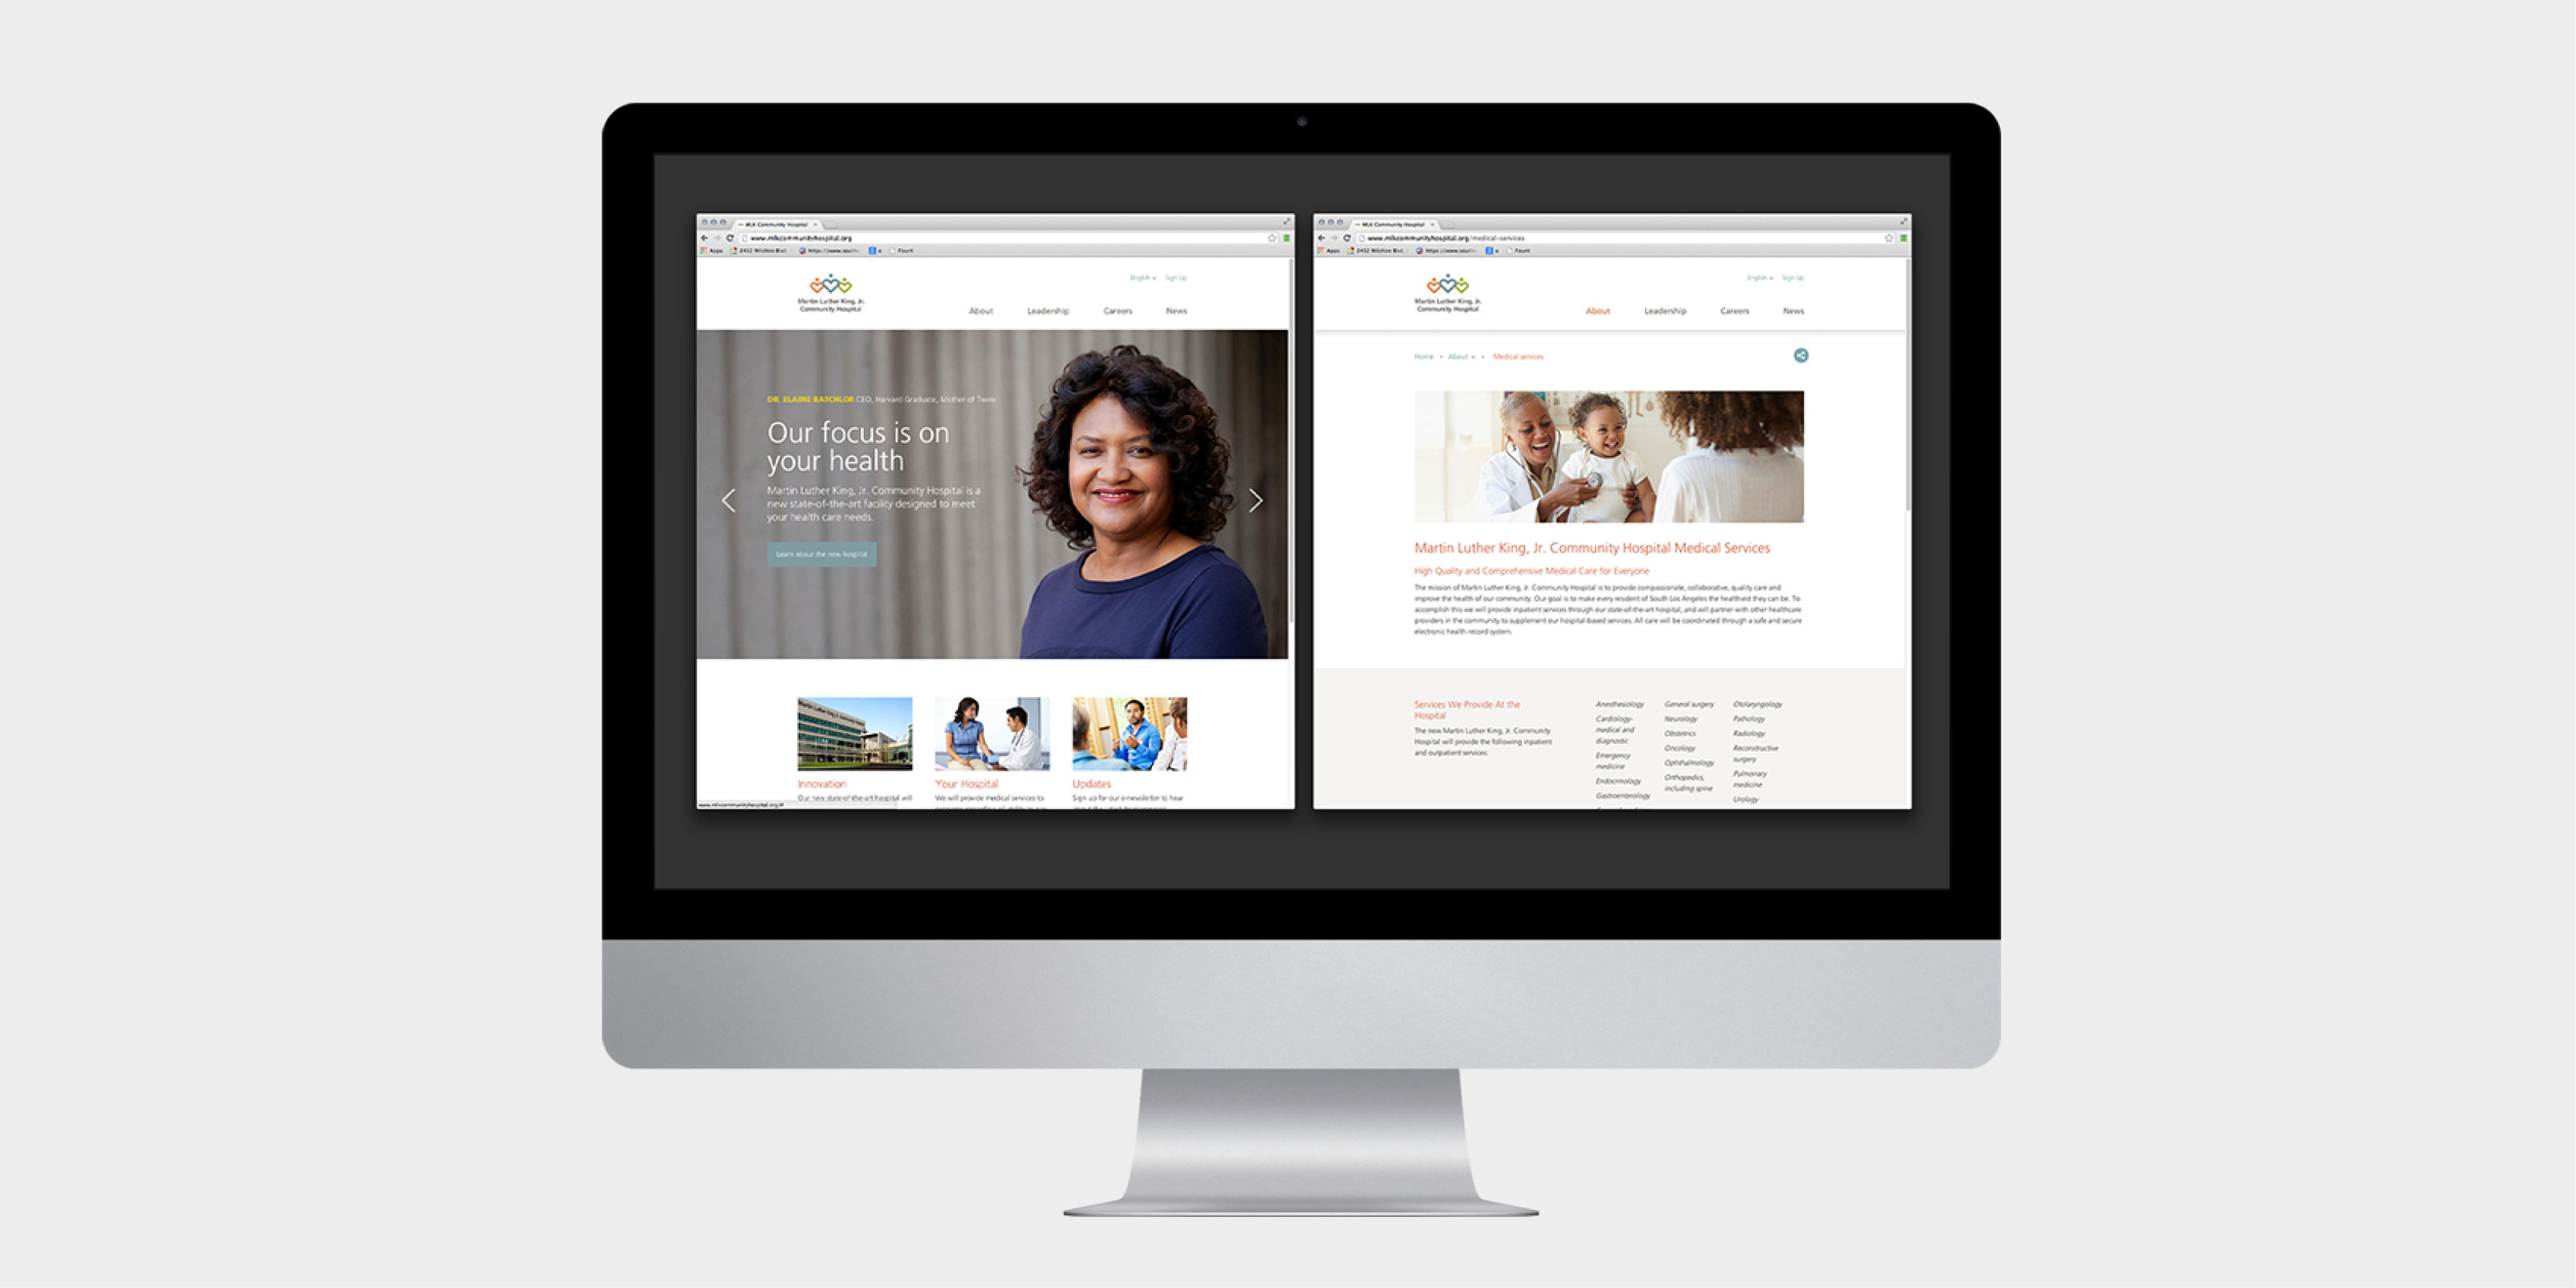 Prior to the hospital's official opening, the redesigned website focused on the people behind MLKCH to establish a warm, personal online presence.